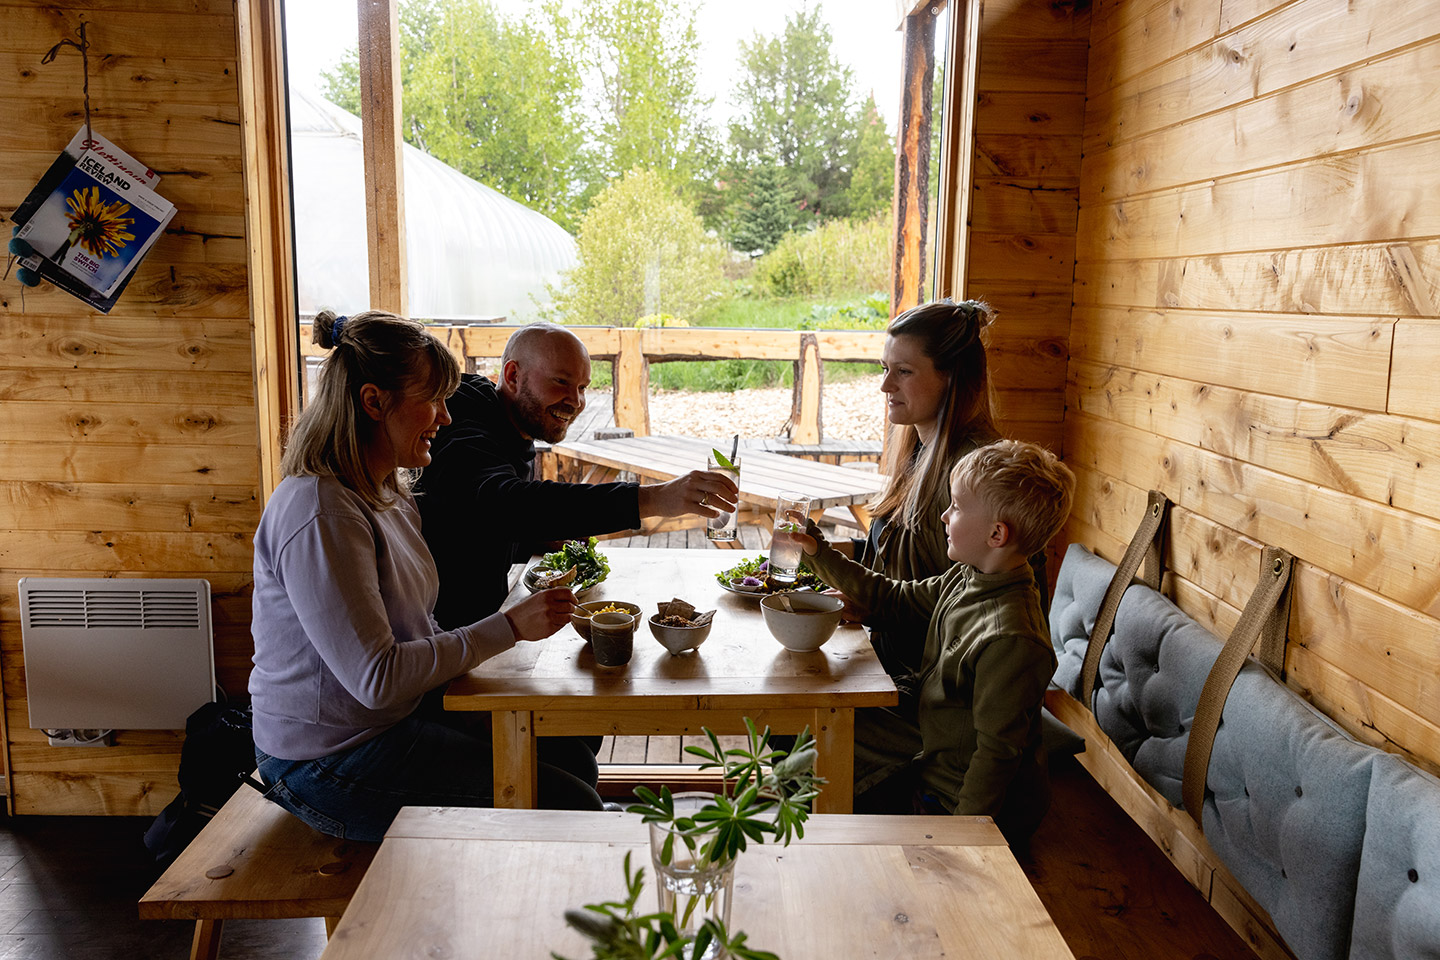 For a taste of organic local produce we recommend a visit to Asparhúsið in Vallanes organic farm.